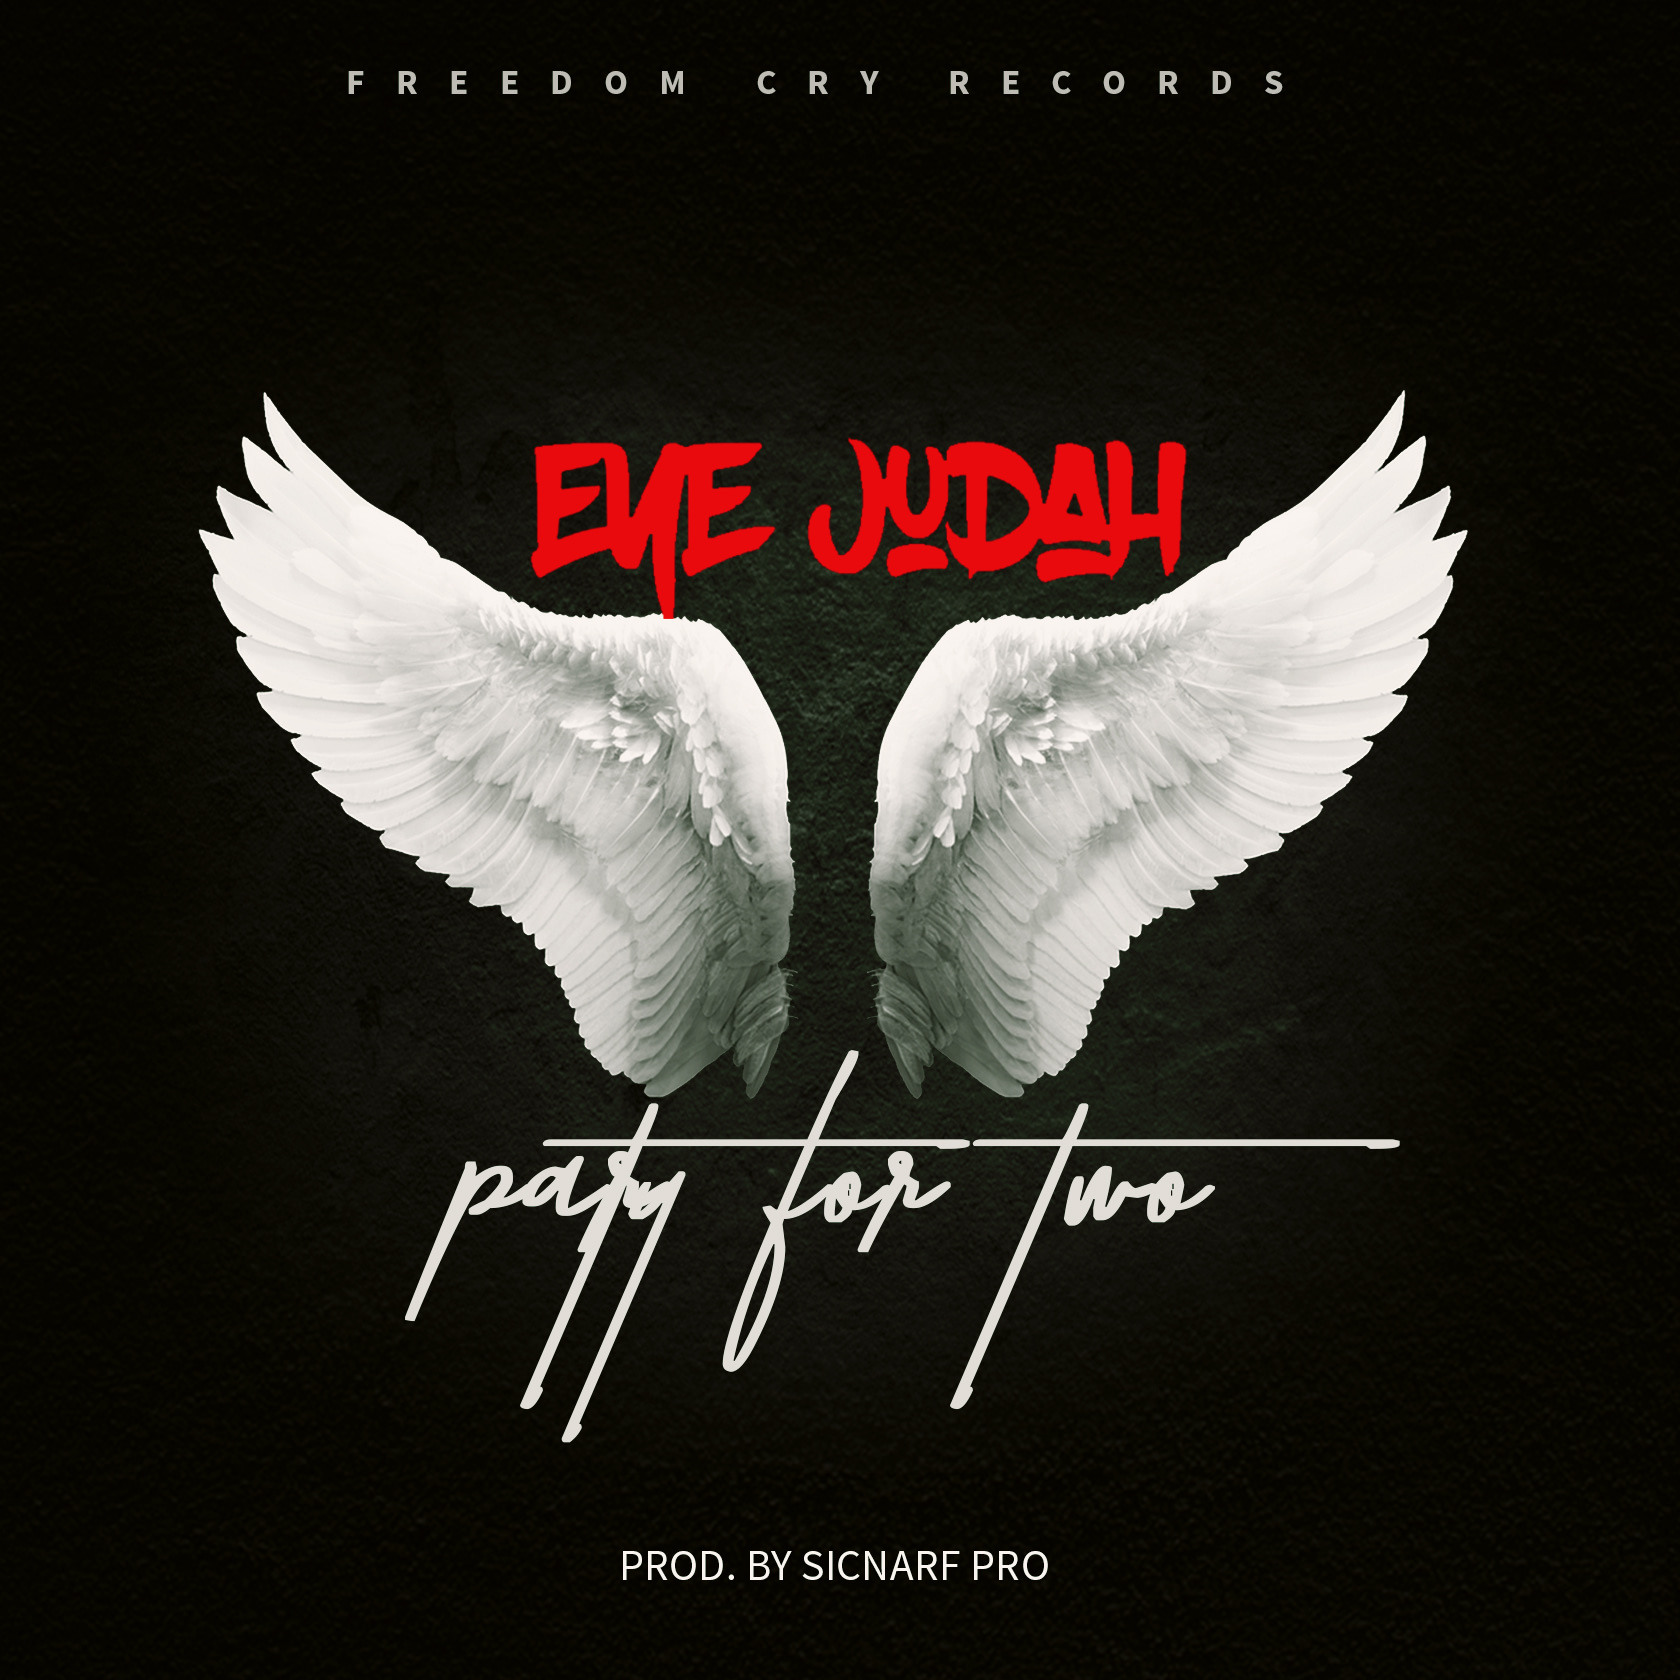 Eye Judah Party For Two Prod. by Sicnarf Pro